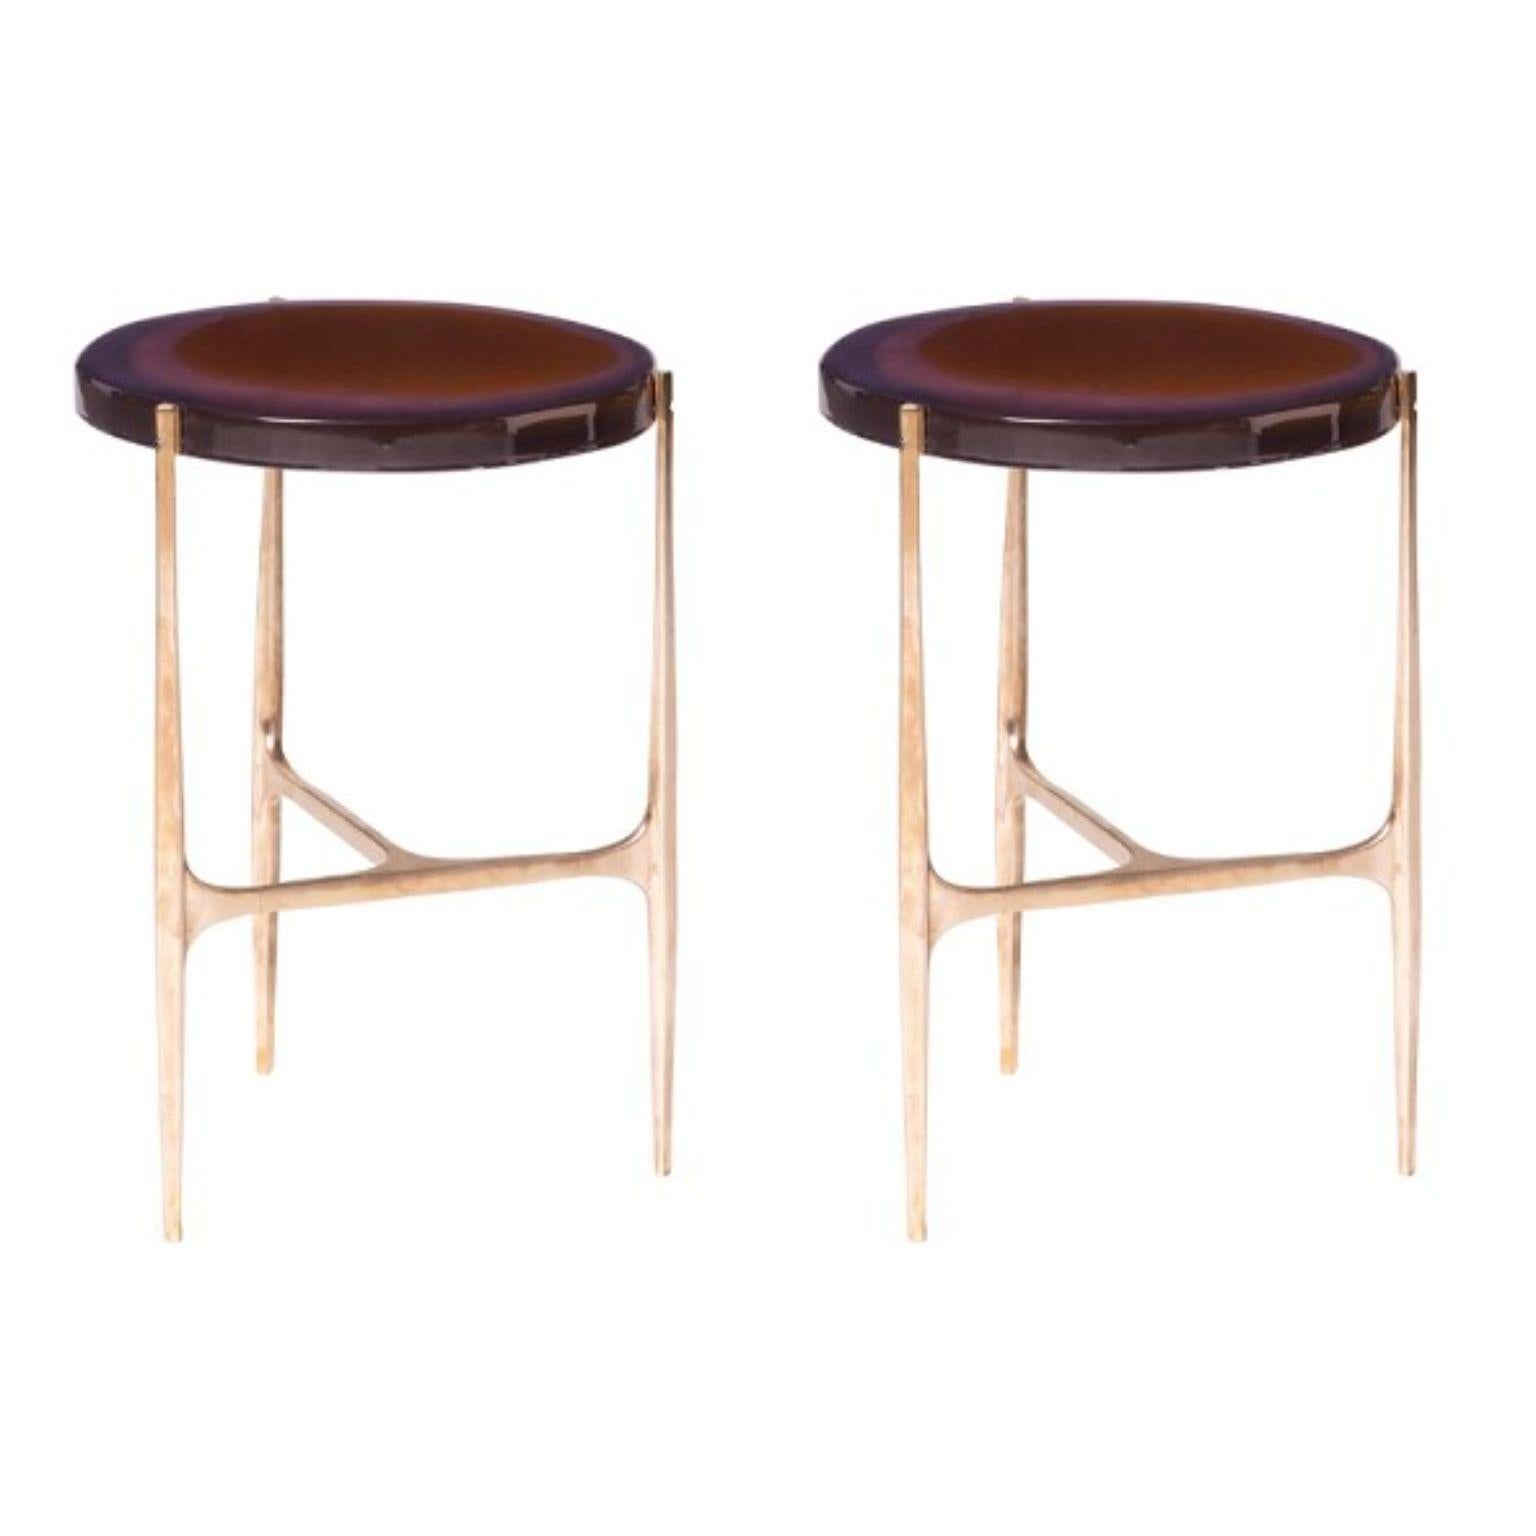 Set of 2 Agatha coffee tables by Draga & Aurel
Dimensions: W 34 x D 34 x H 50
Top Ø 34 cm
Materials: Resin, bronze

The Agatha coffee tables are featured by irregular circular tops of transparent and
colorful resin sit on a bronze frame with a